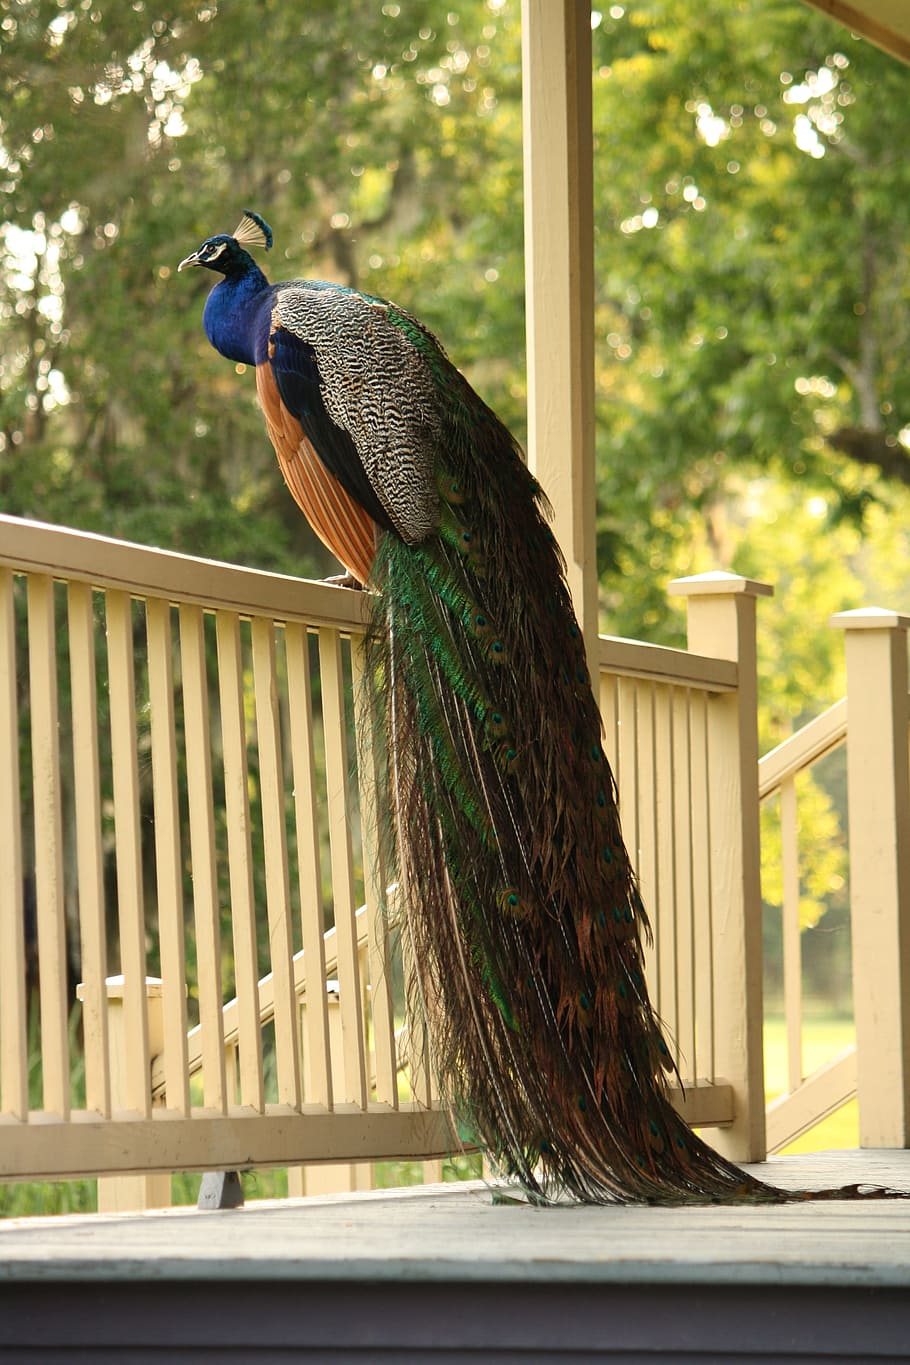 peacock, white, wooden, handrails, across, trees, daytime, porch, birds, beautiful